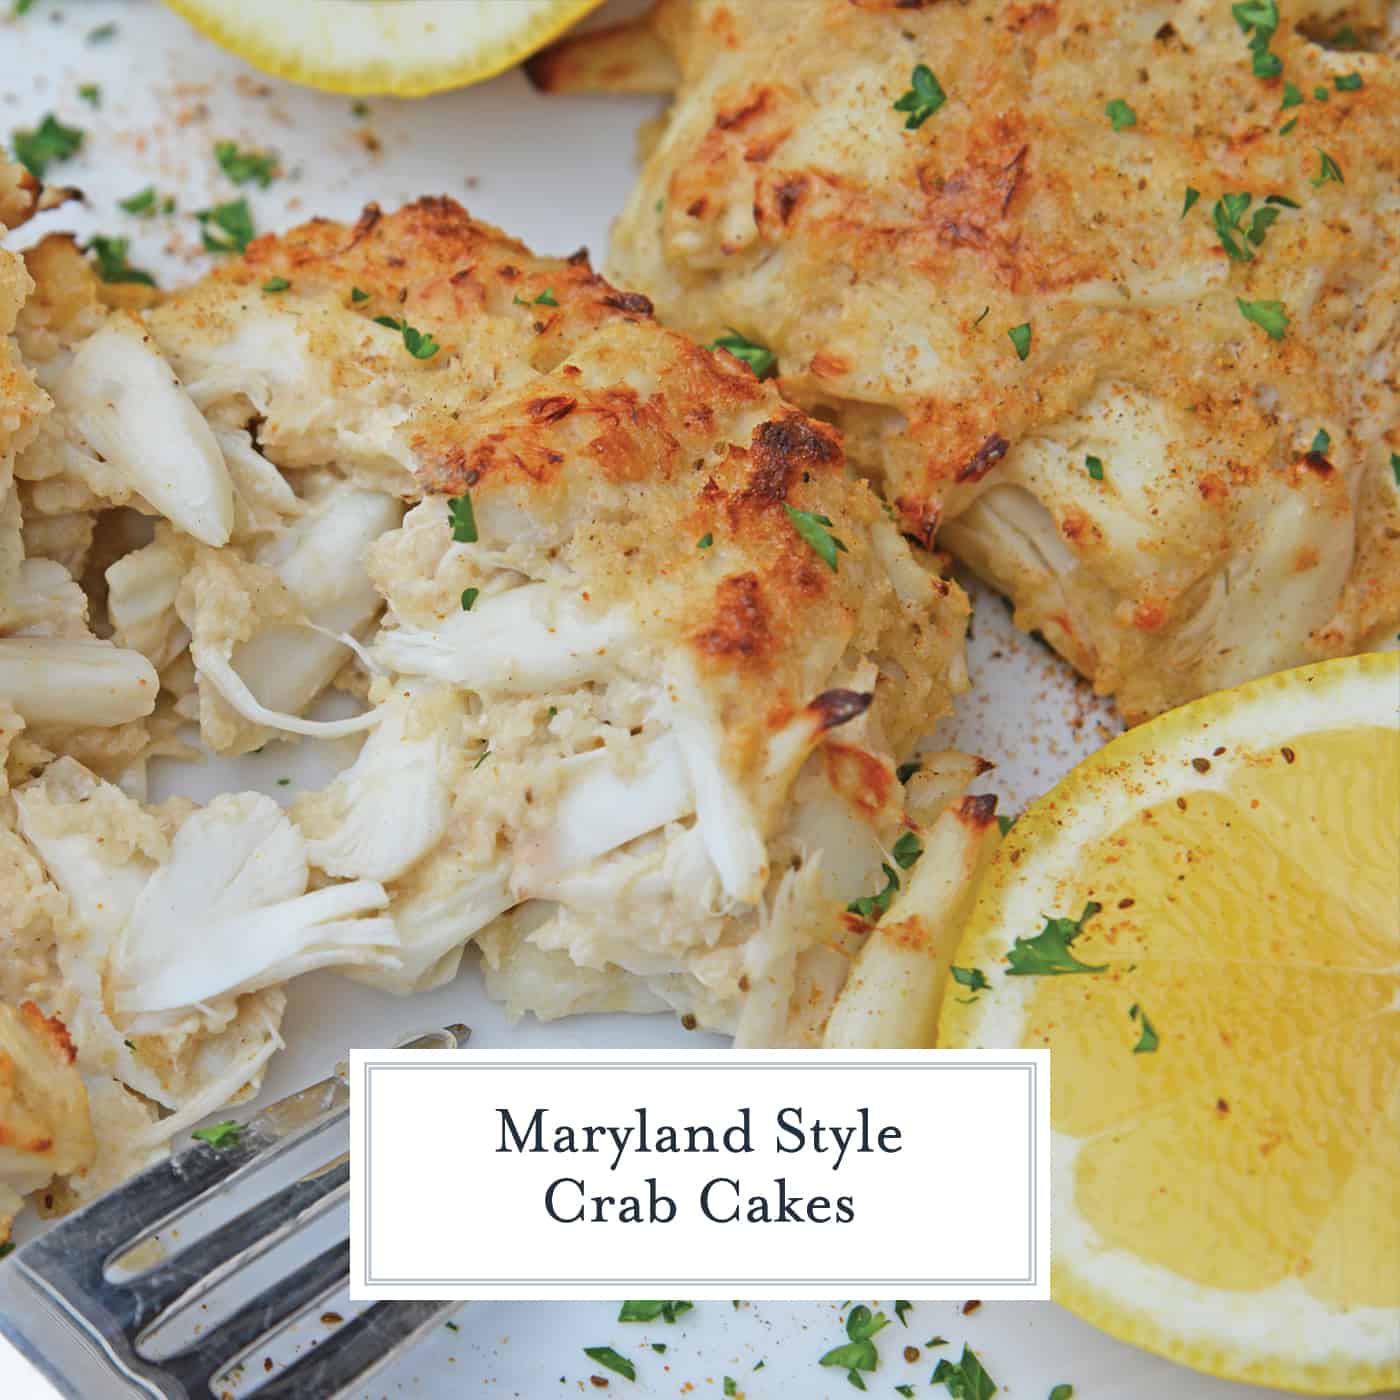 Authentic Maryland Crab Cakes